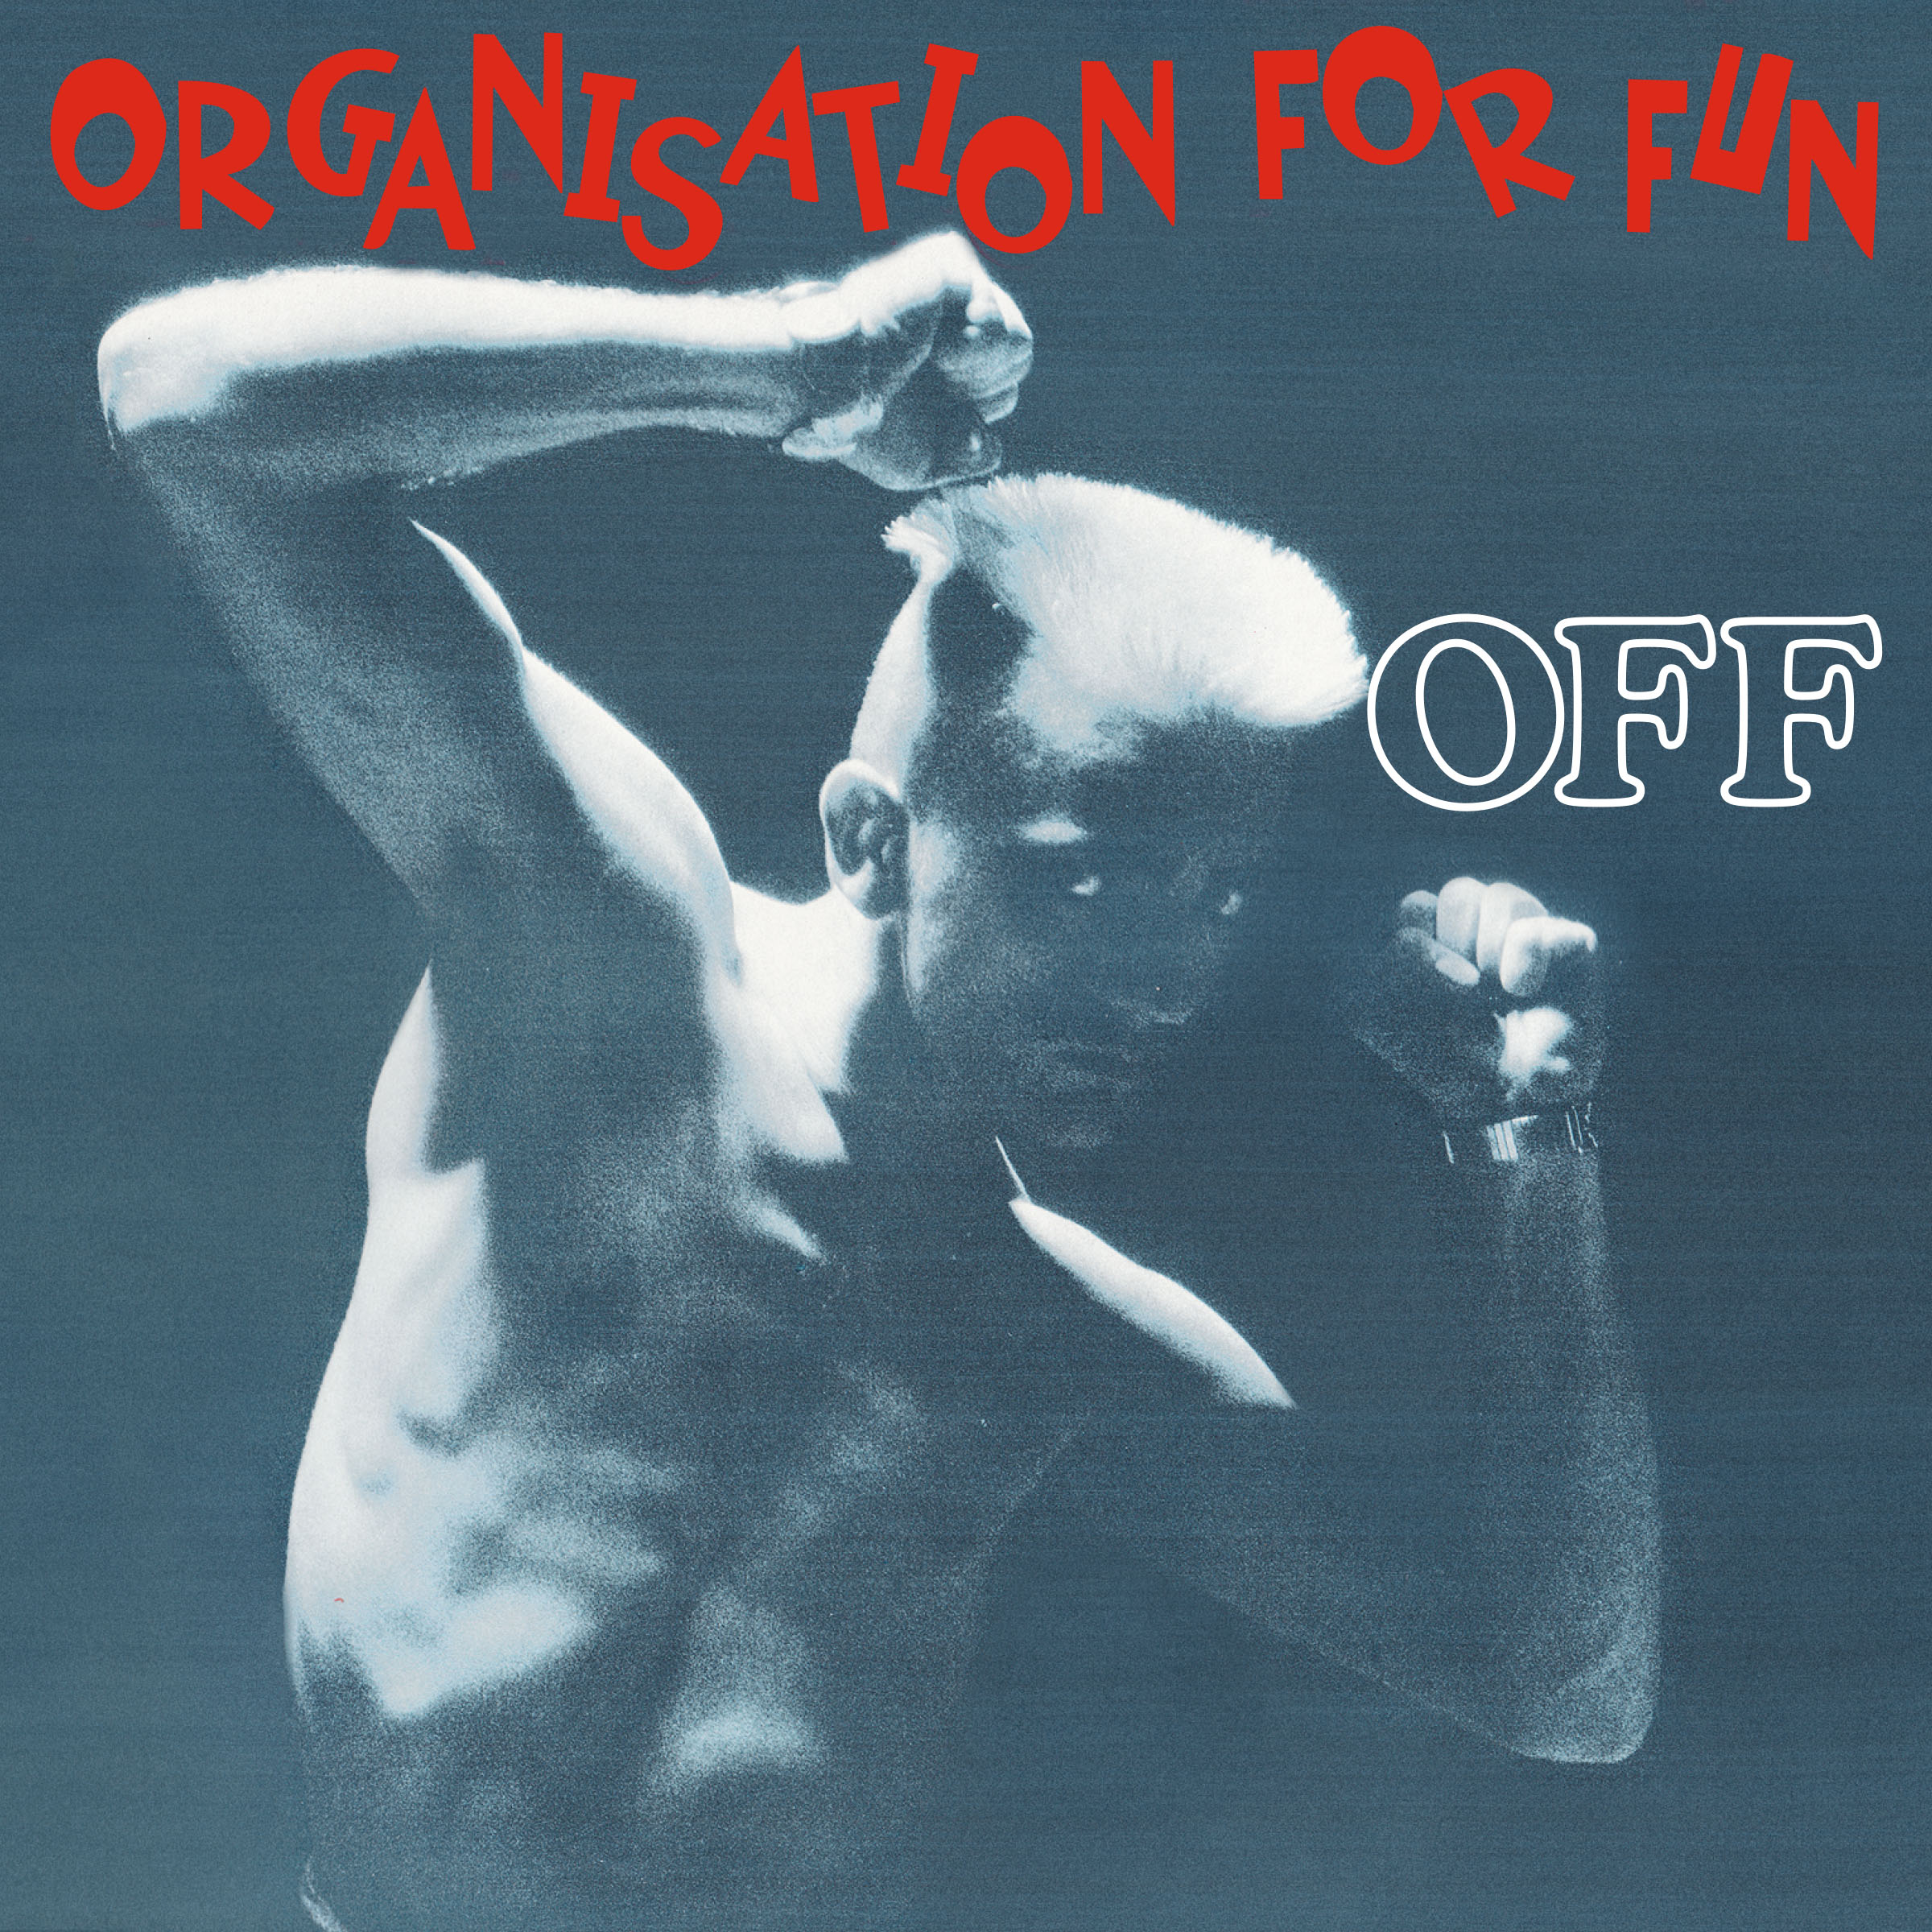 Off songs. Группа off 1988. Organisation for fun обложка альбома. Off organisation for fun. Off electrica Salsa.